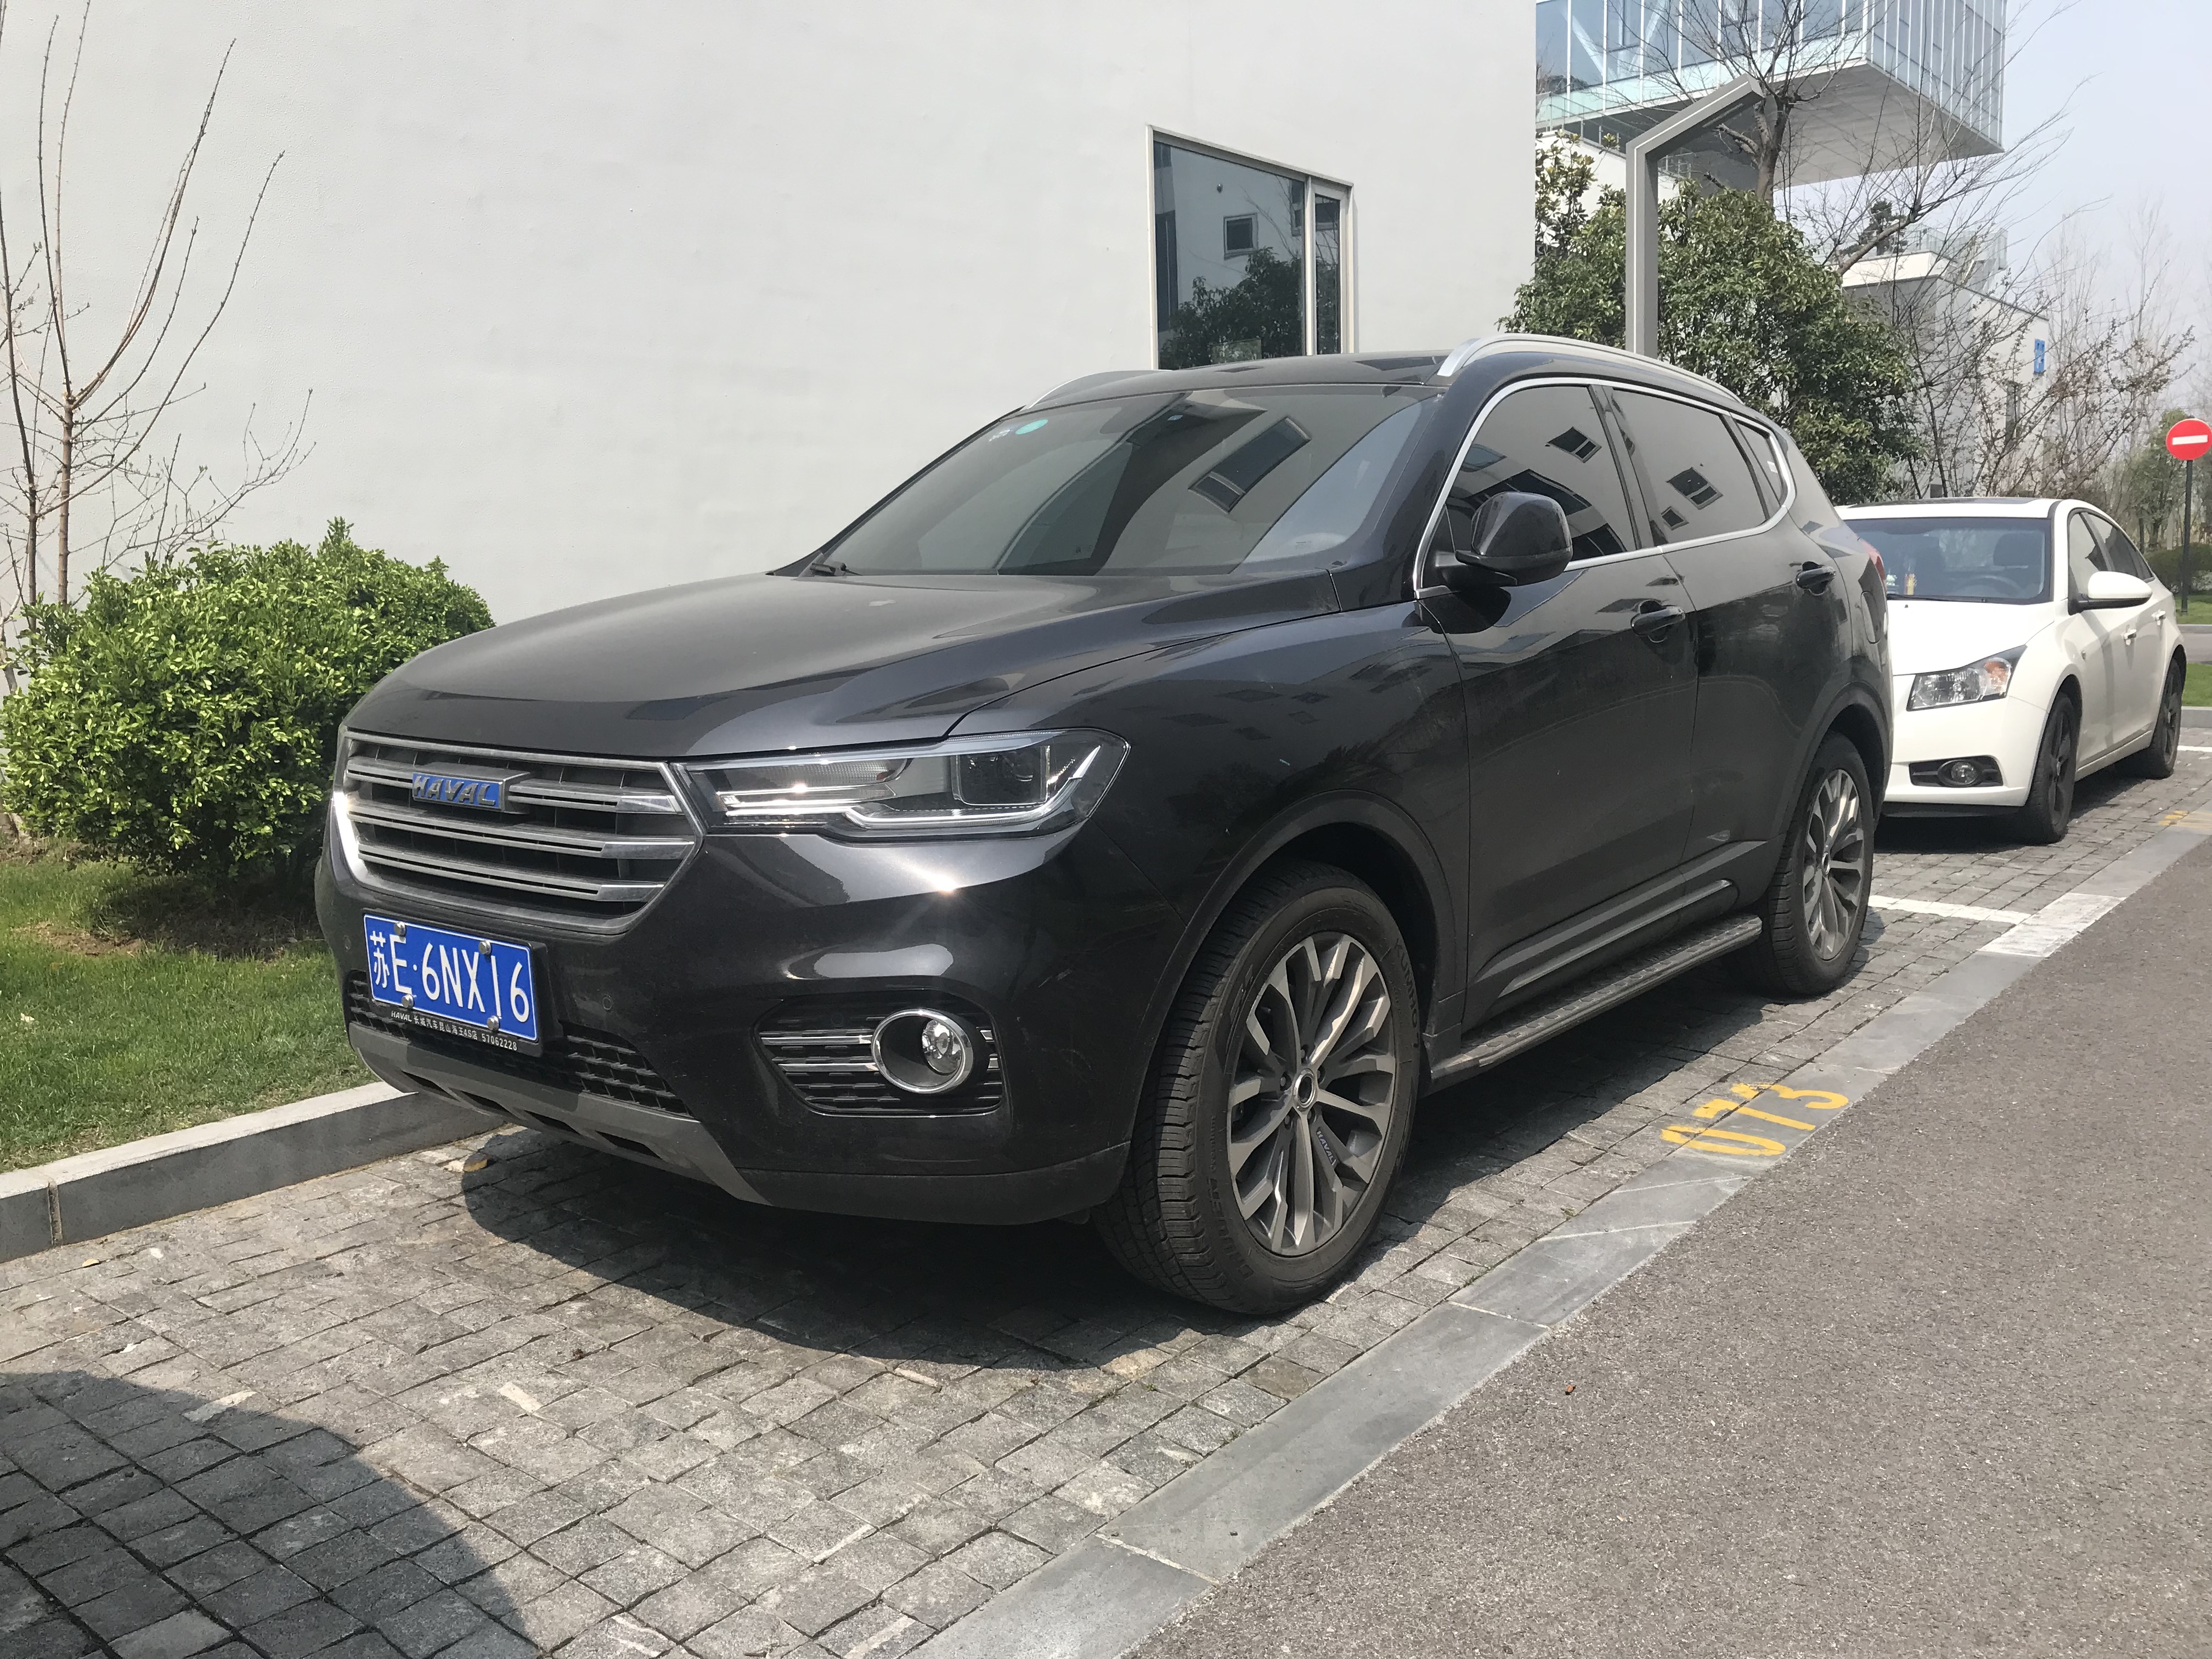 Great Wall Haval H6 Blue Label suv model